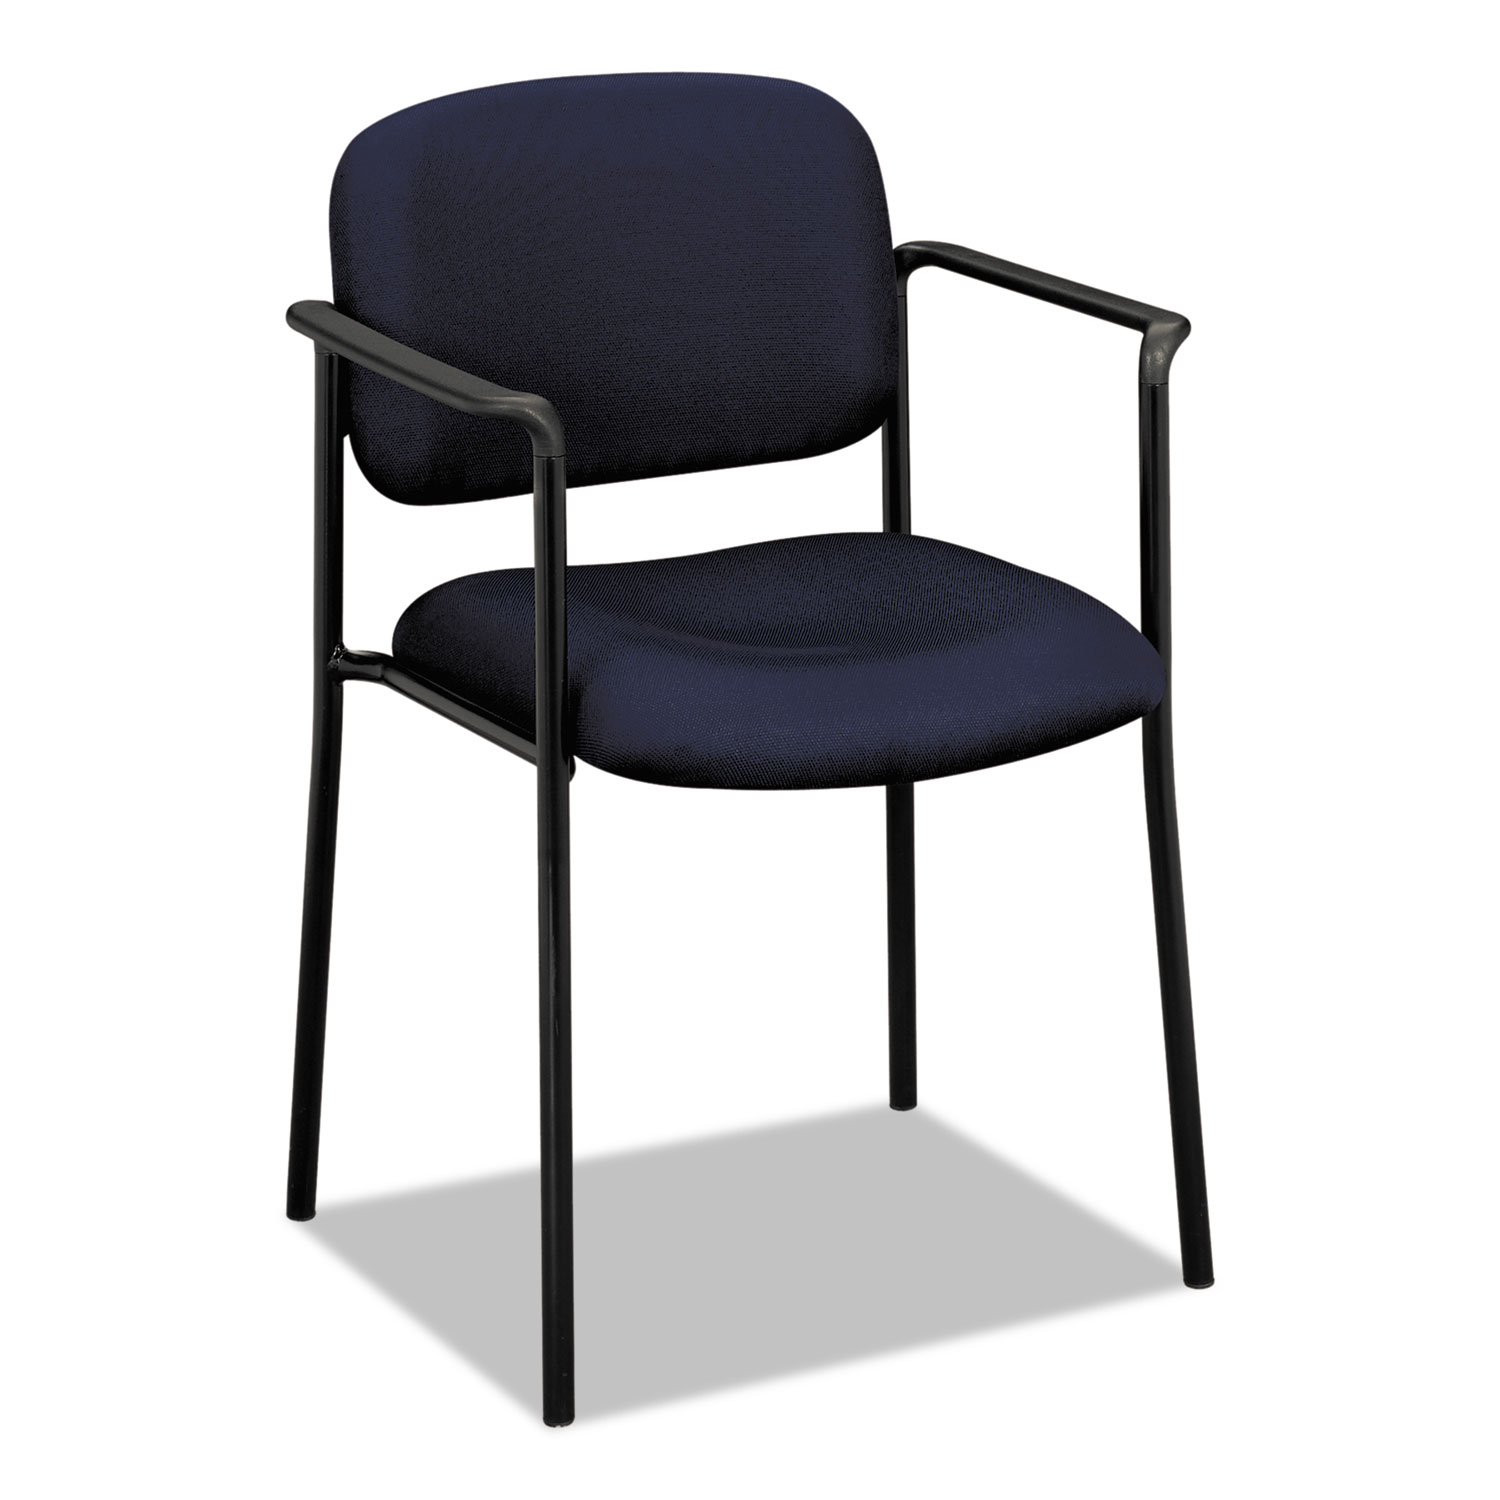  HON HVL616.VA90 VL616 Stacking Guest Chair with Arms, Navy Seat/Navy Back, Black Base (BSXVL616VA90) 